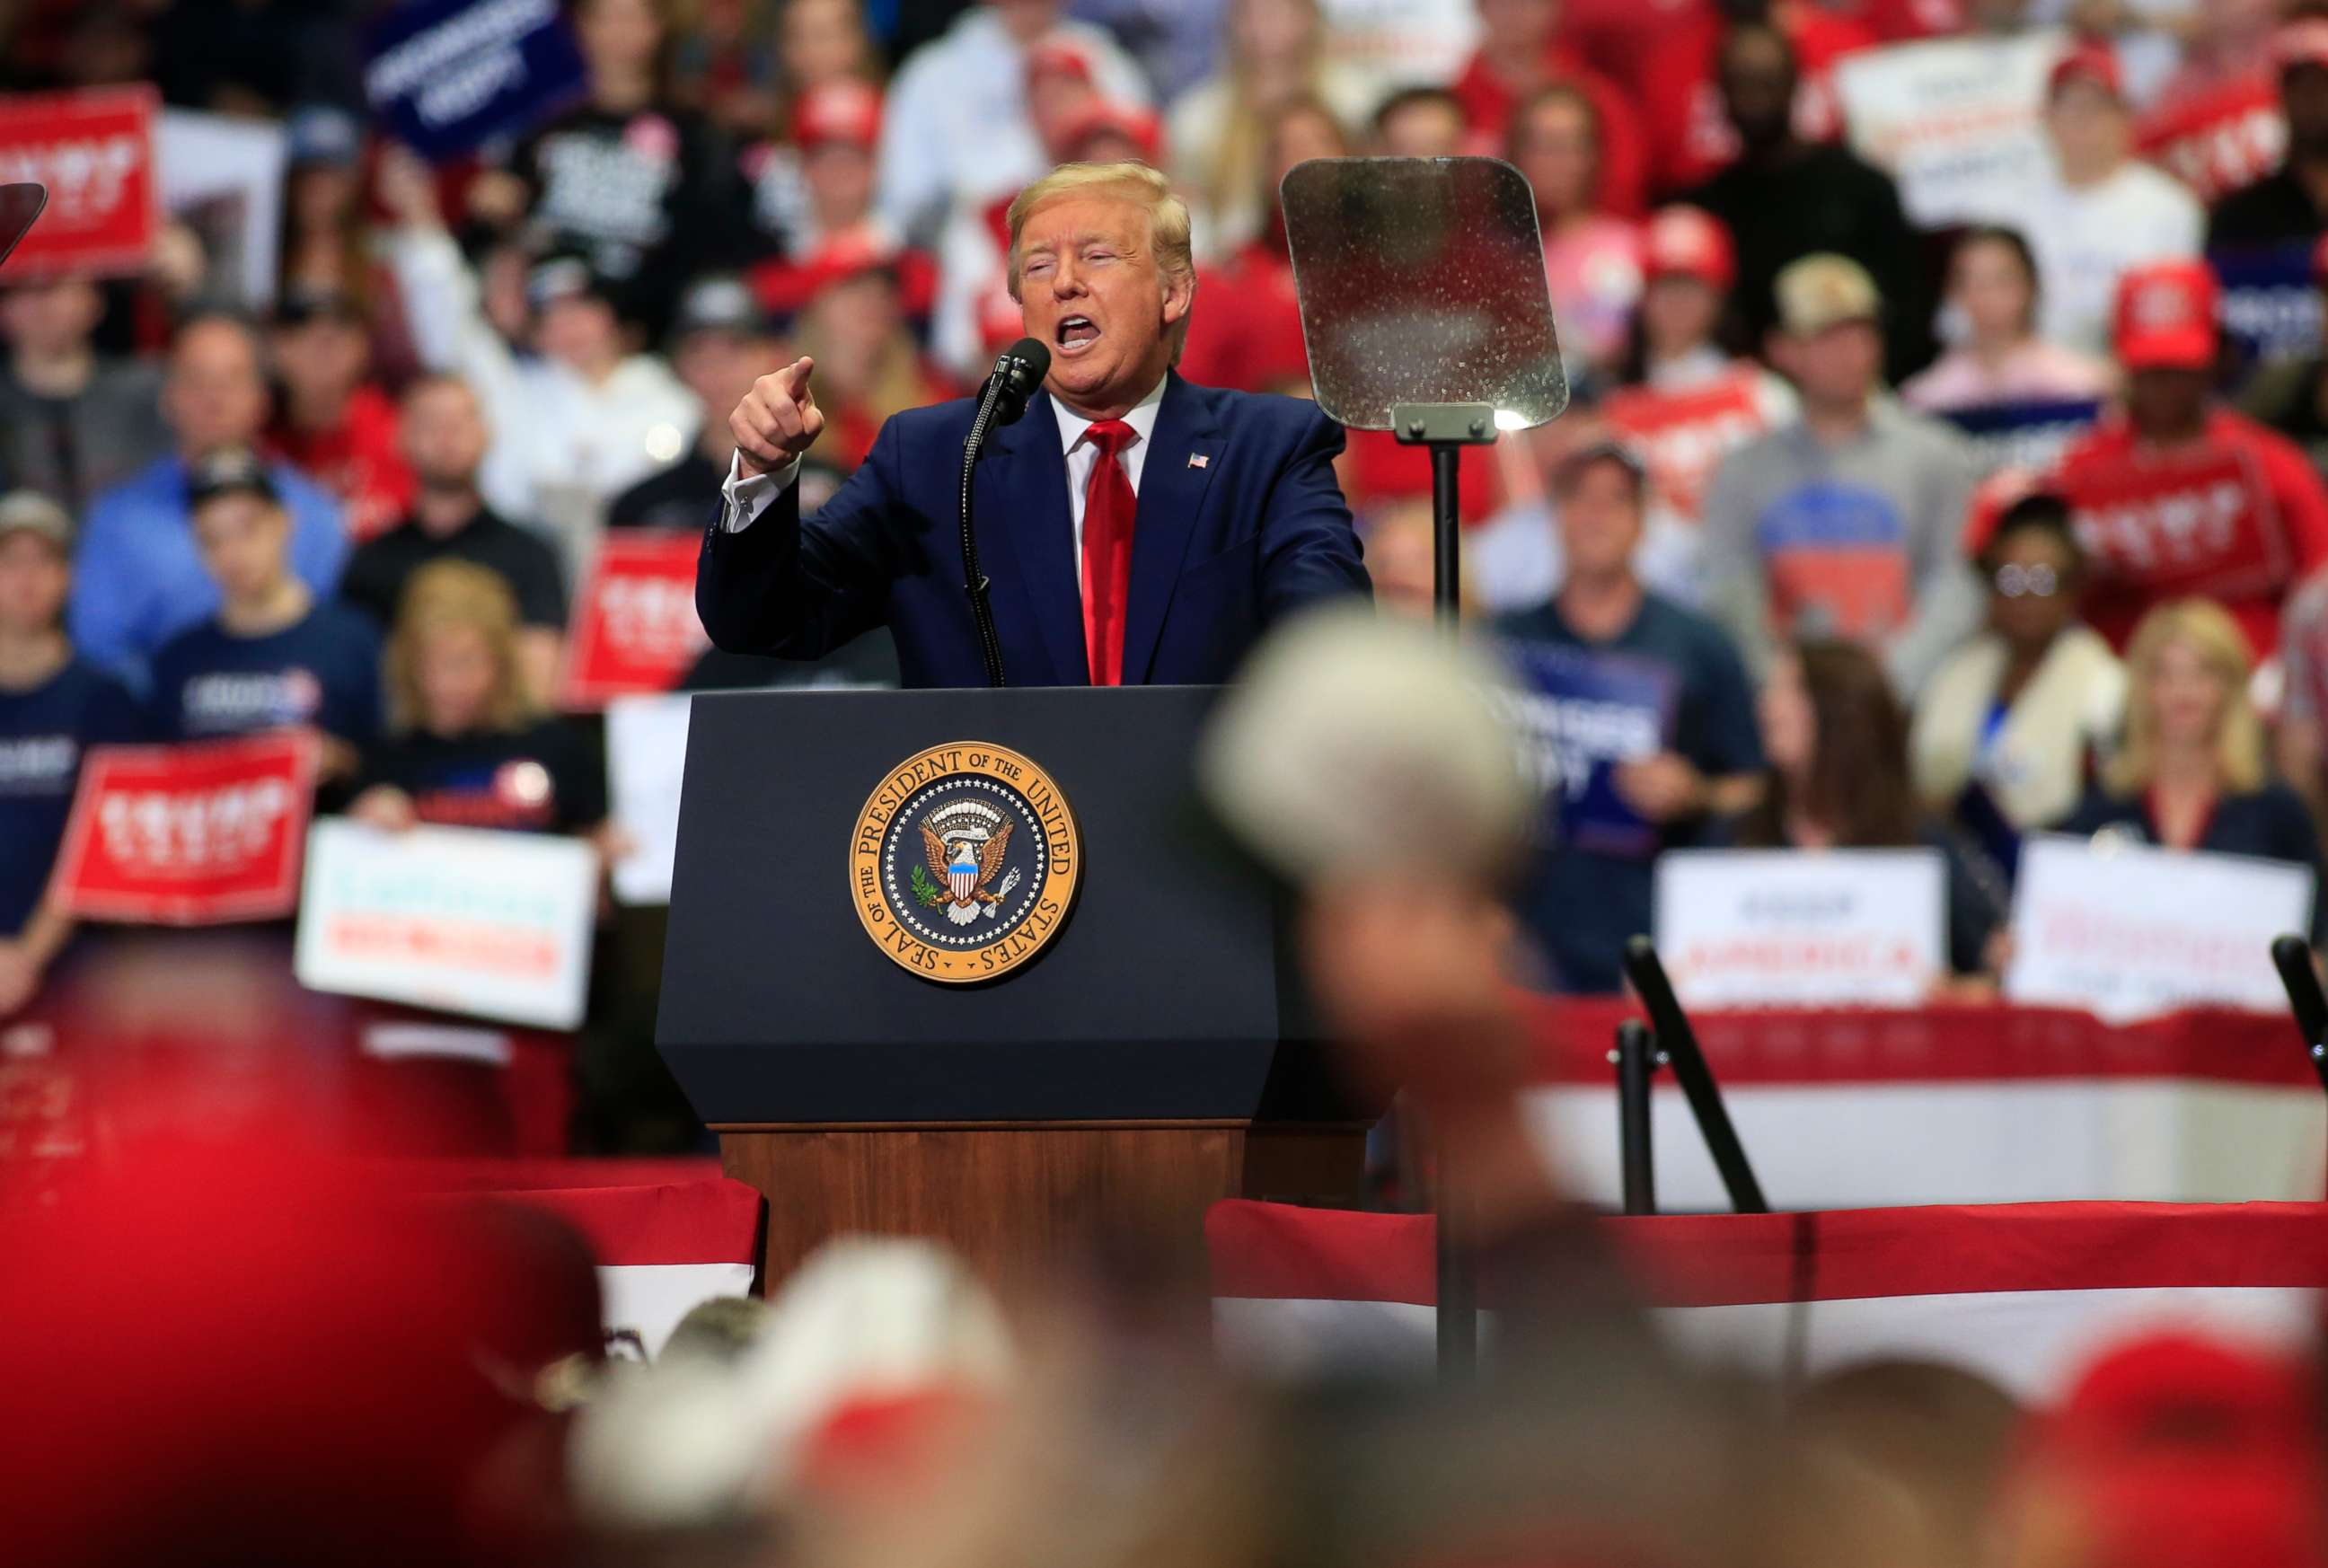 PHOTO: President Donald Trump speaks to supporters during a rally, March 2, 2020, in Charlotte, North Carolina.